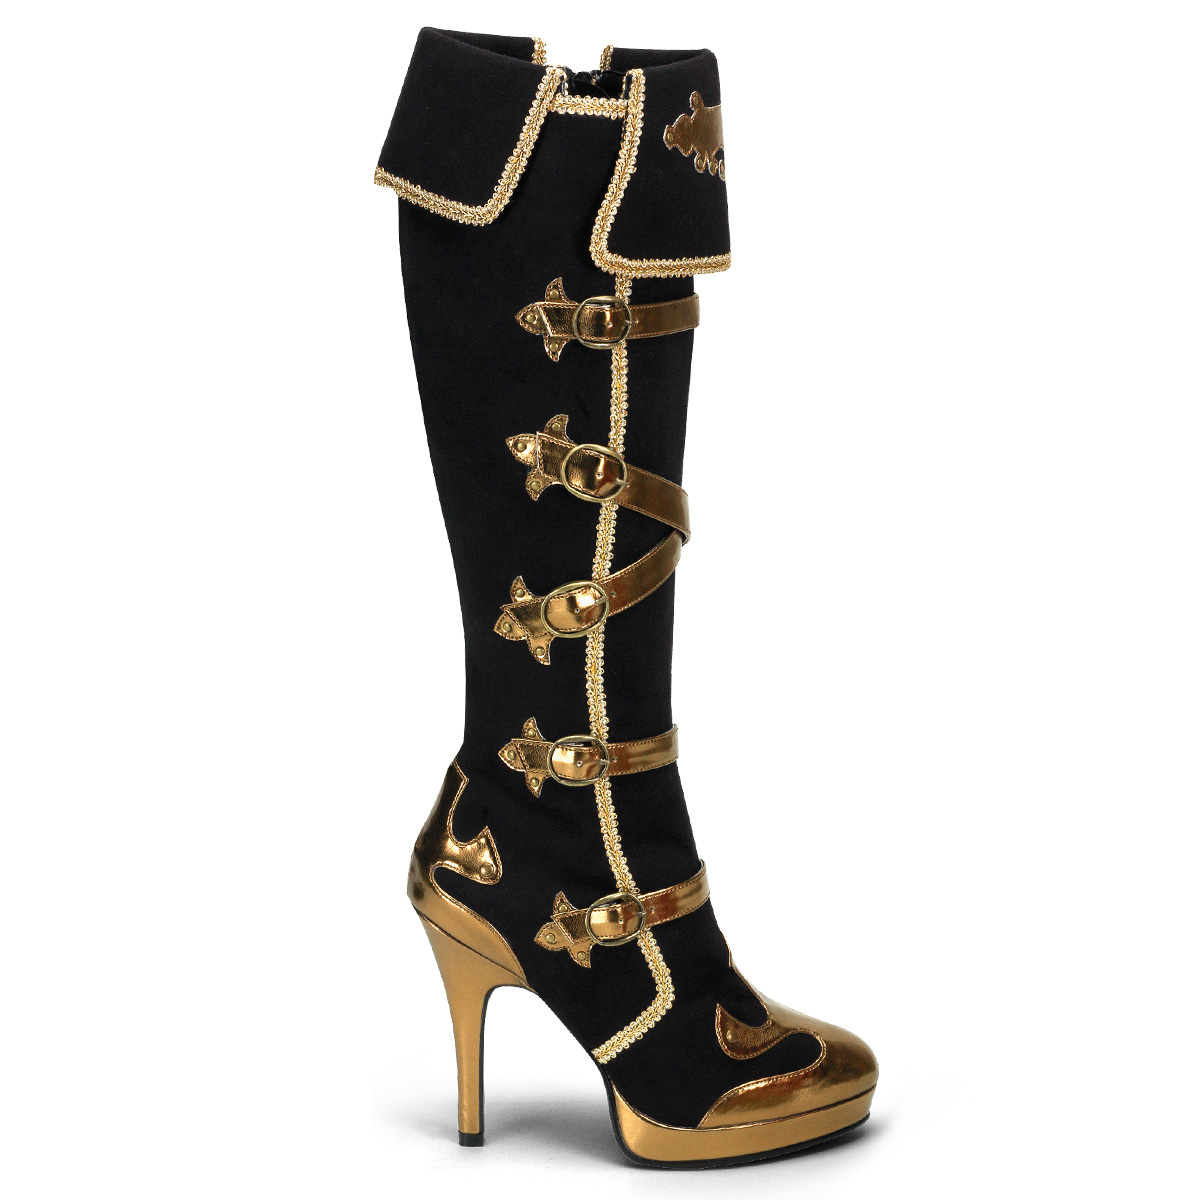 Black knee high upscale pirate costume boots